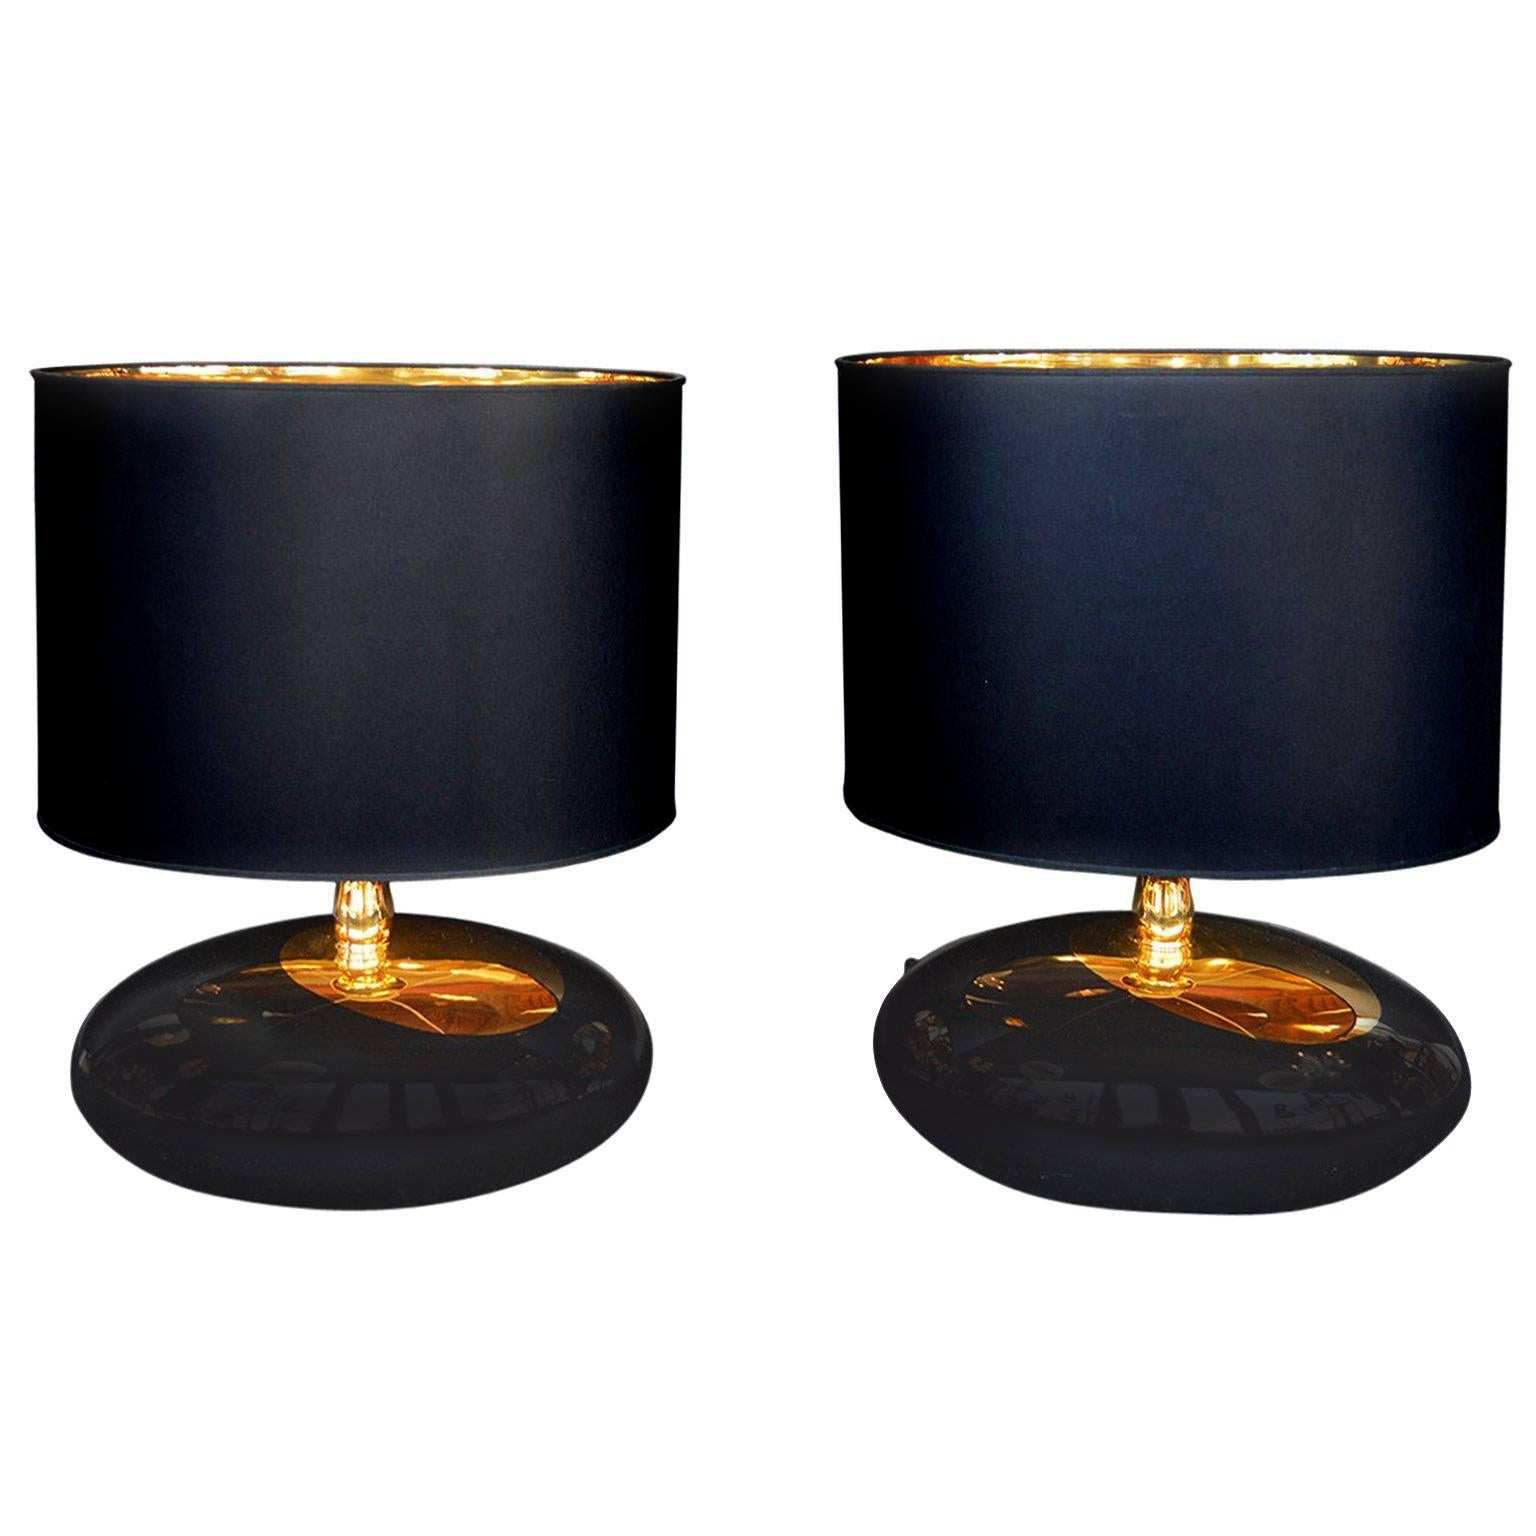 Pair of Italian Pebble Lamps with Gold